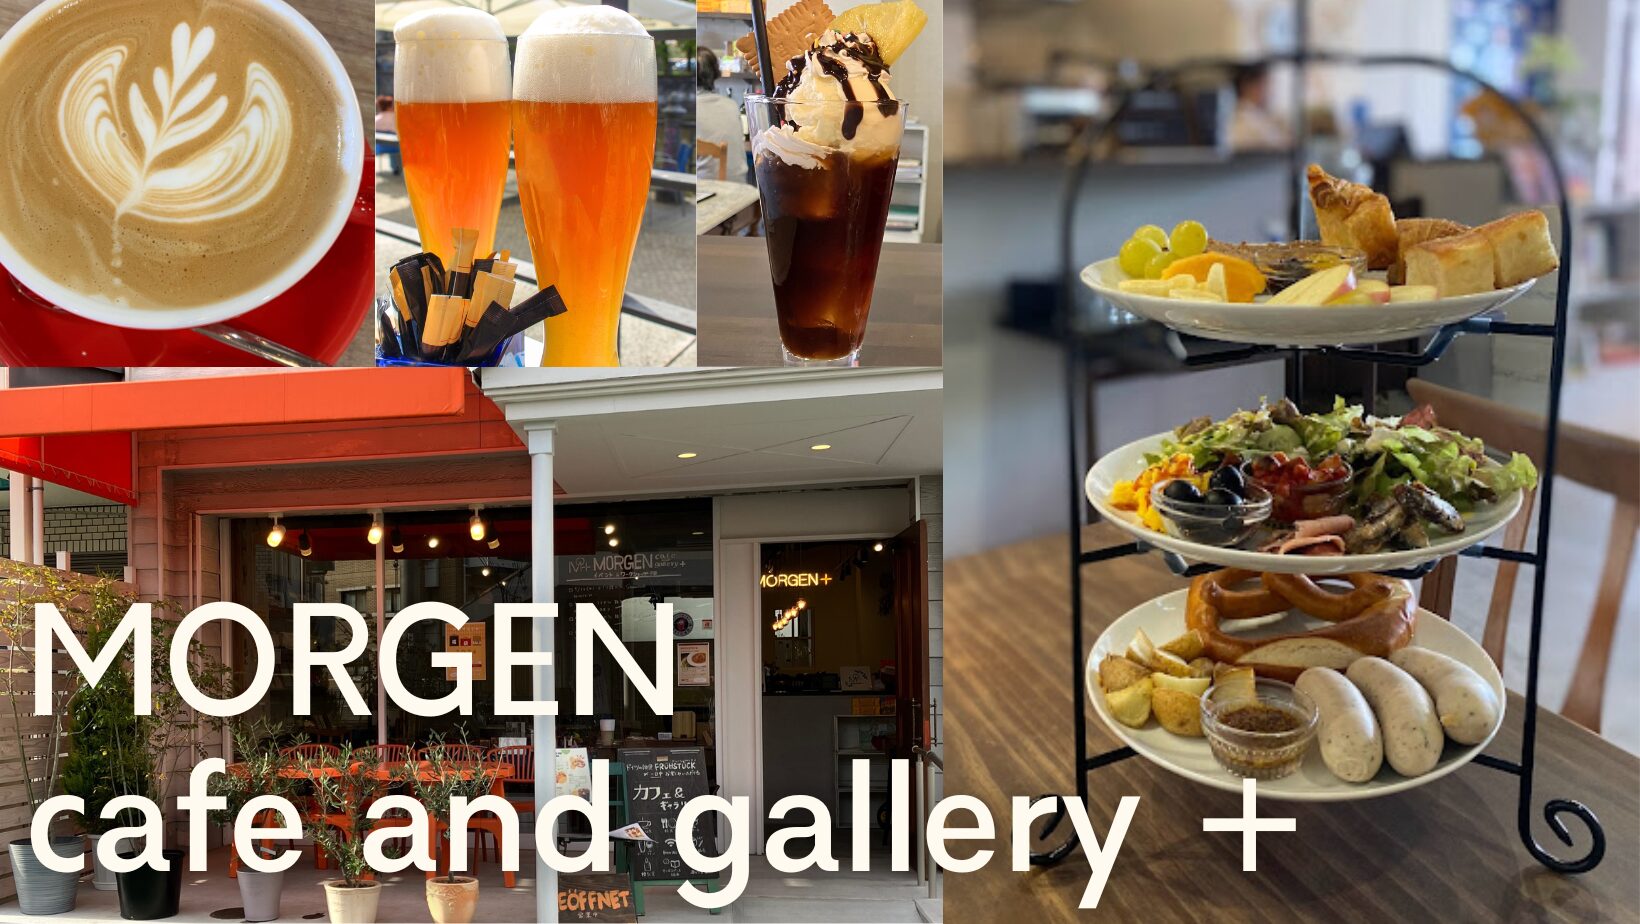 MORGEN cafe and gallery +